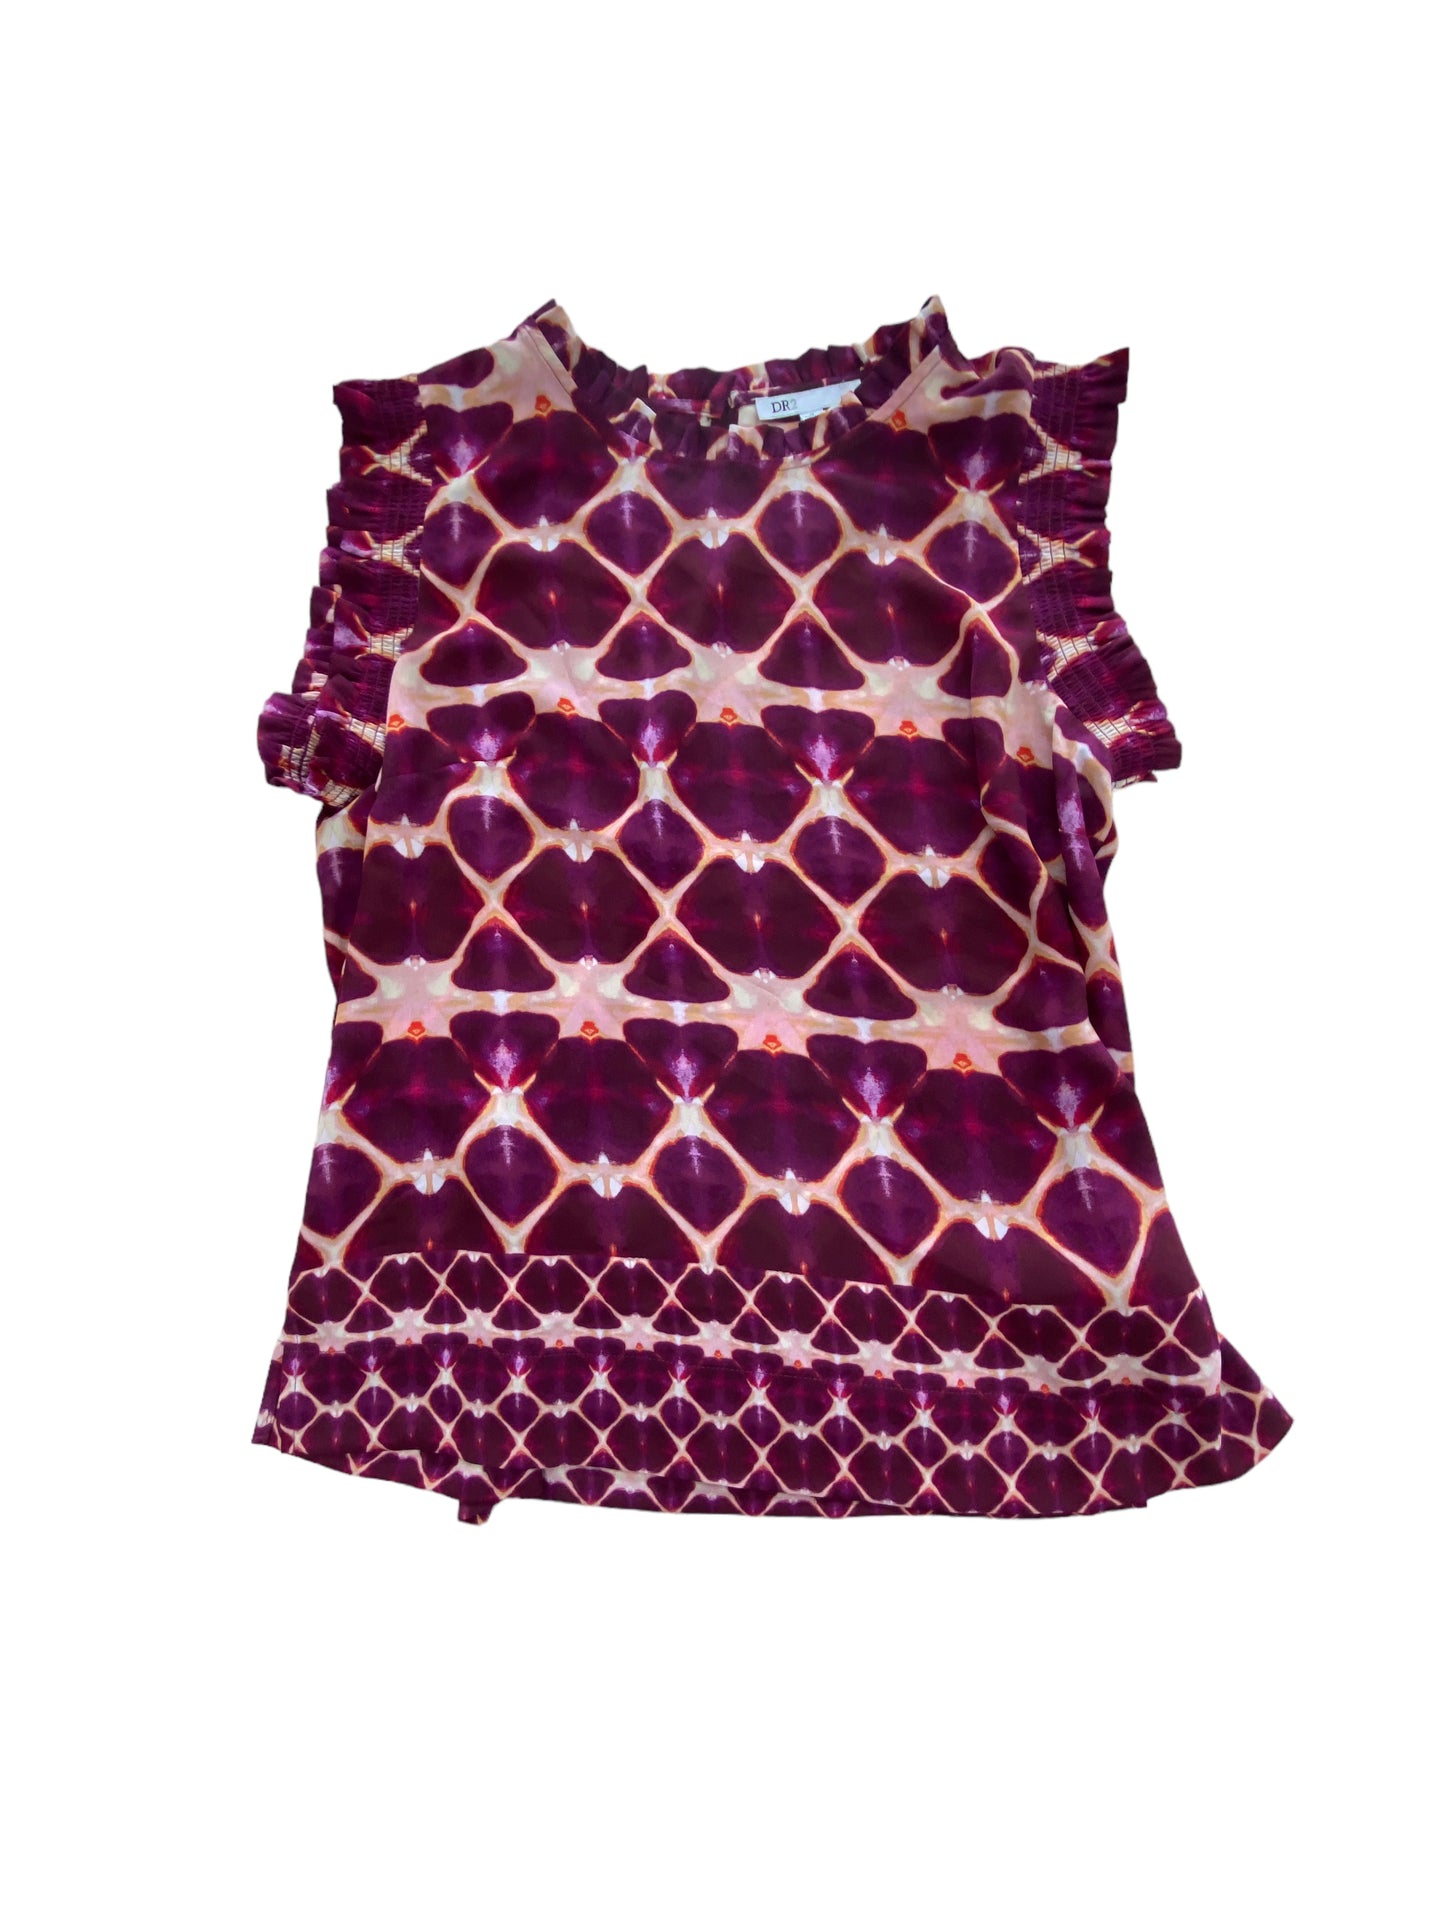 Multi-colored Top Sleeveless Dr2, Size M